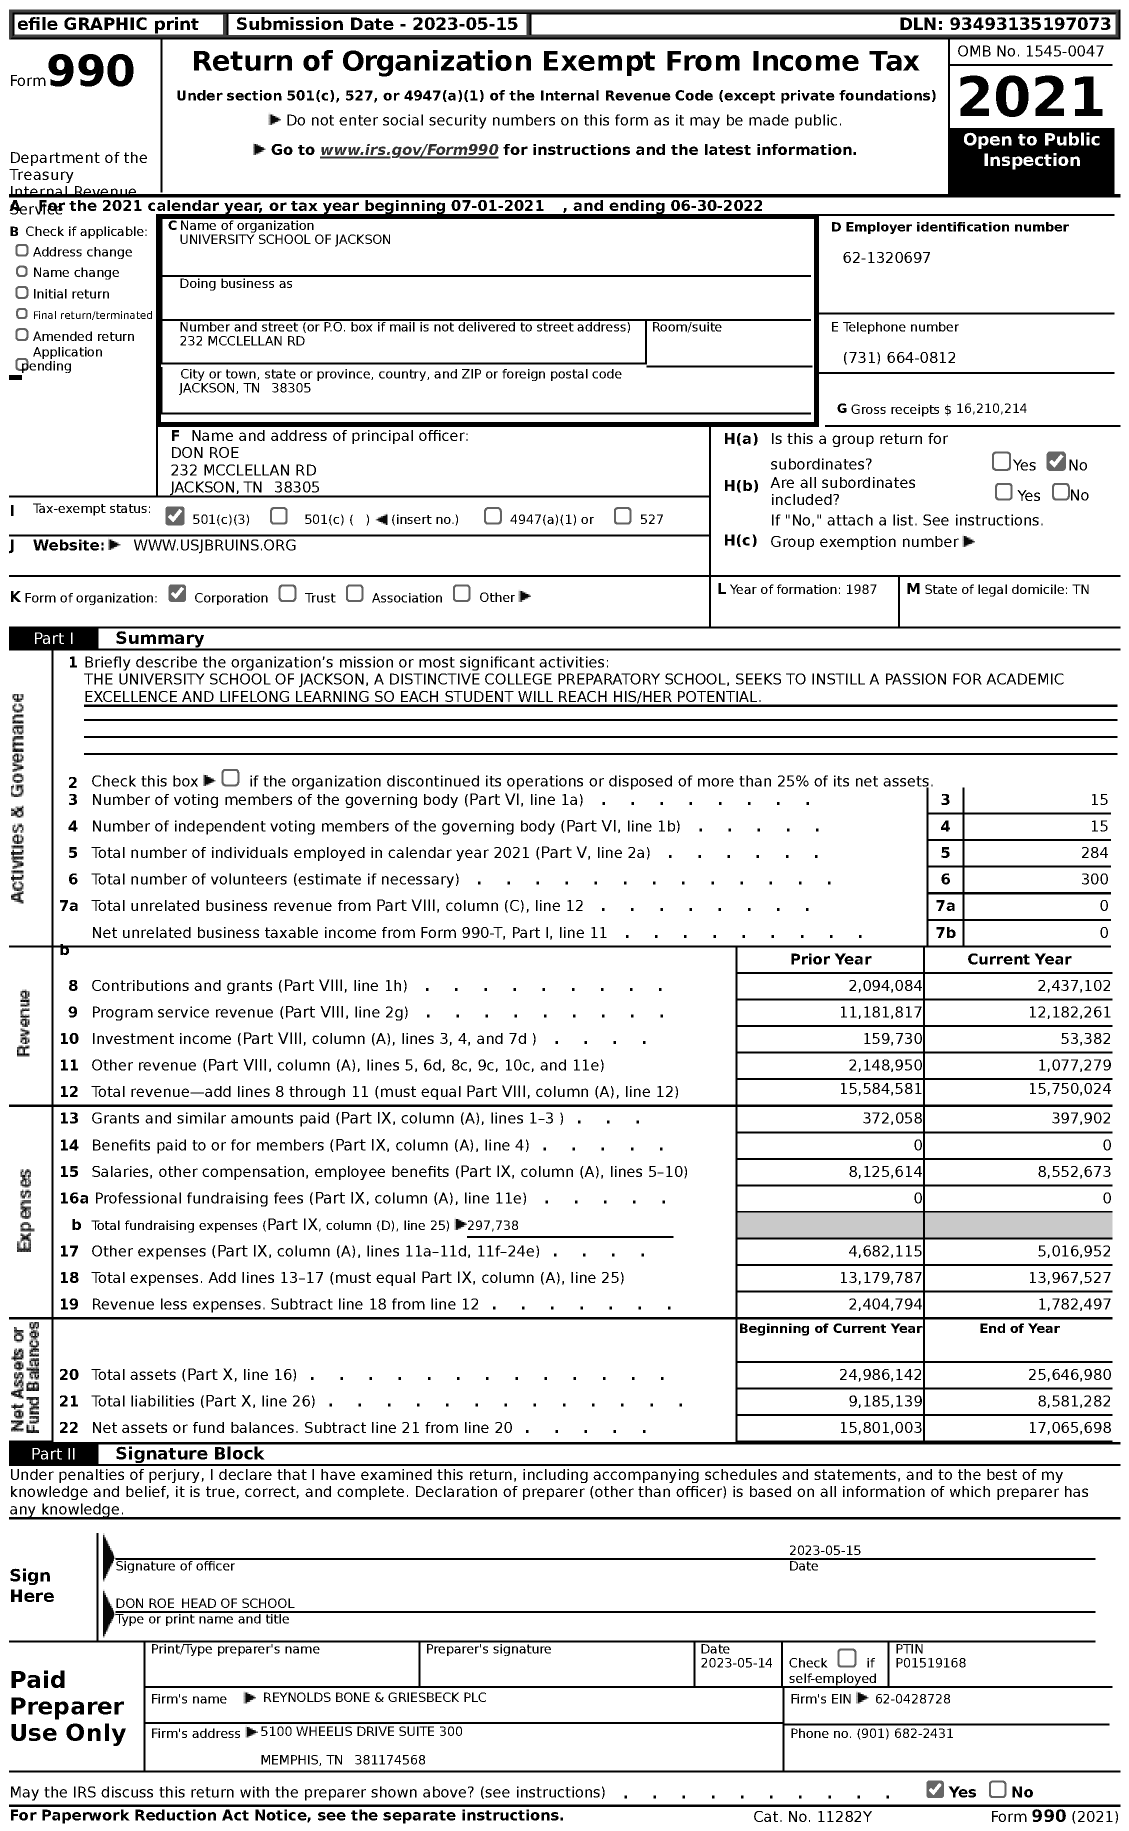 Image of first page of 2021 Form 990 for University School of Jackson (USJ)